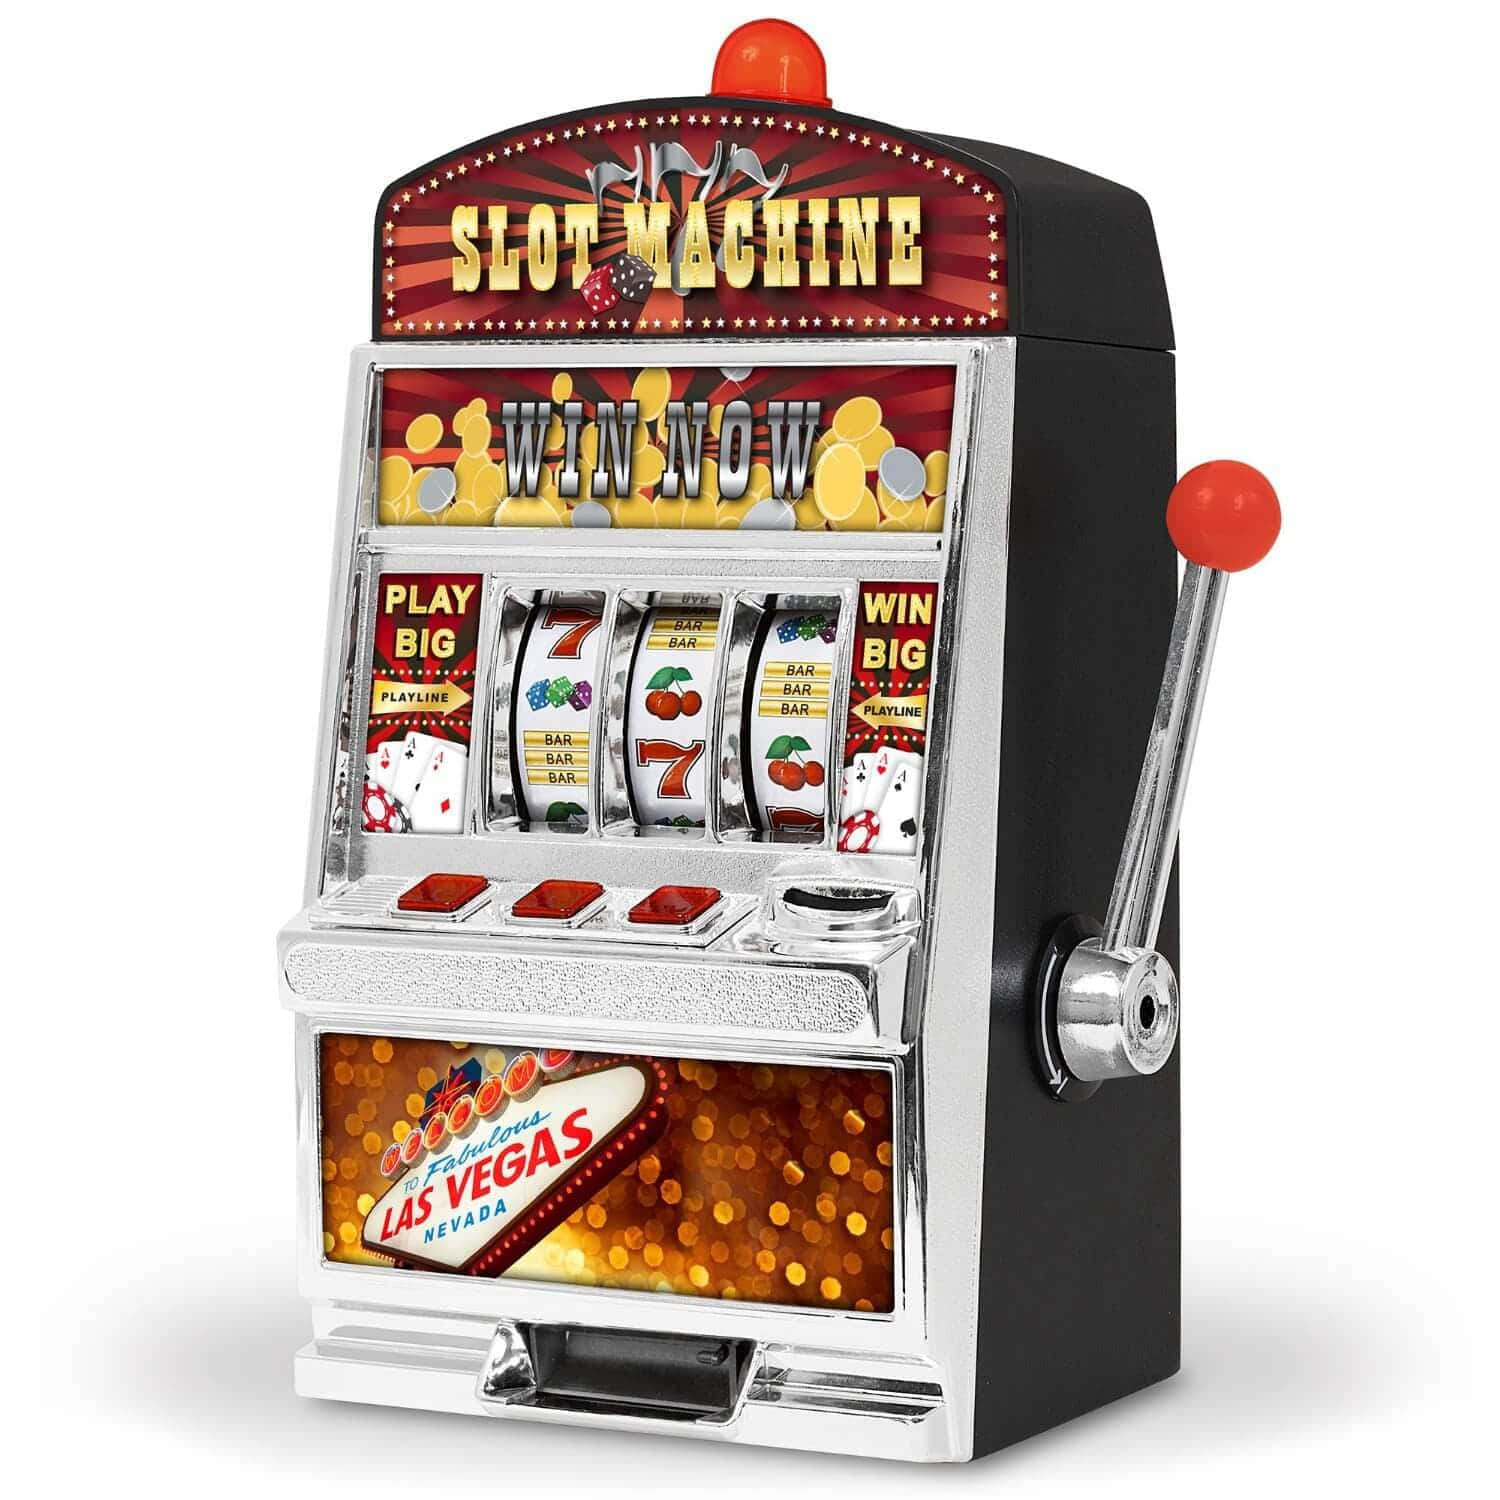 A dynamic and vibrant array of slot machines in a casino.